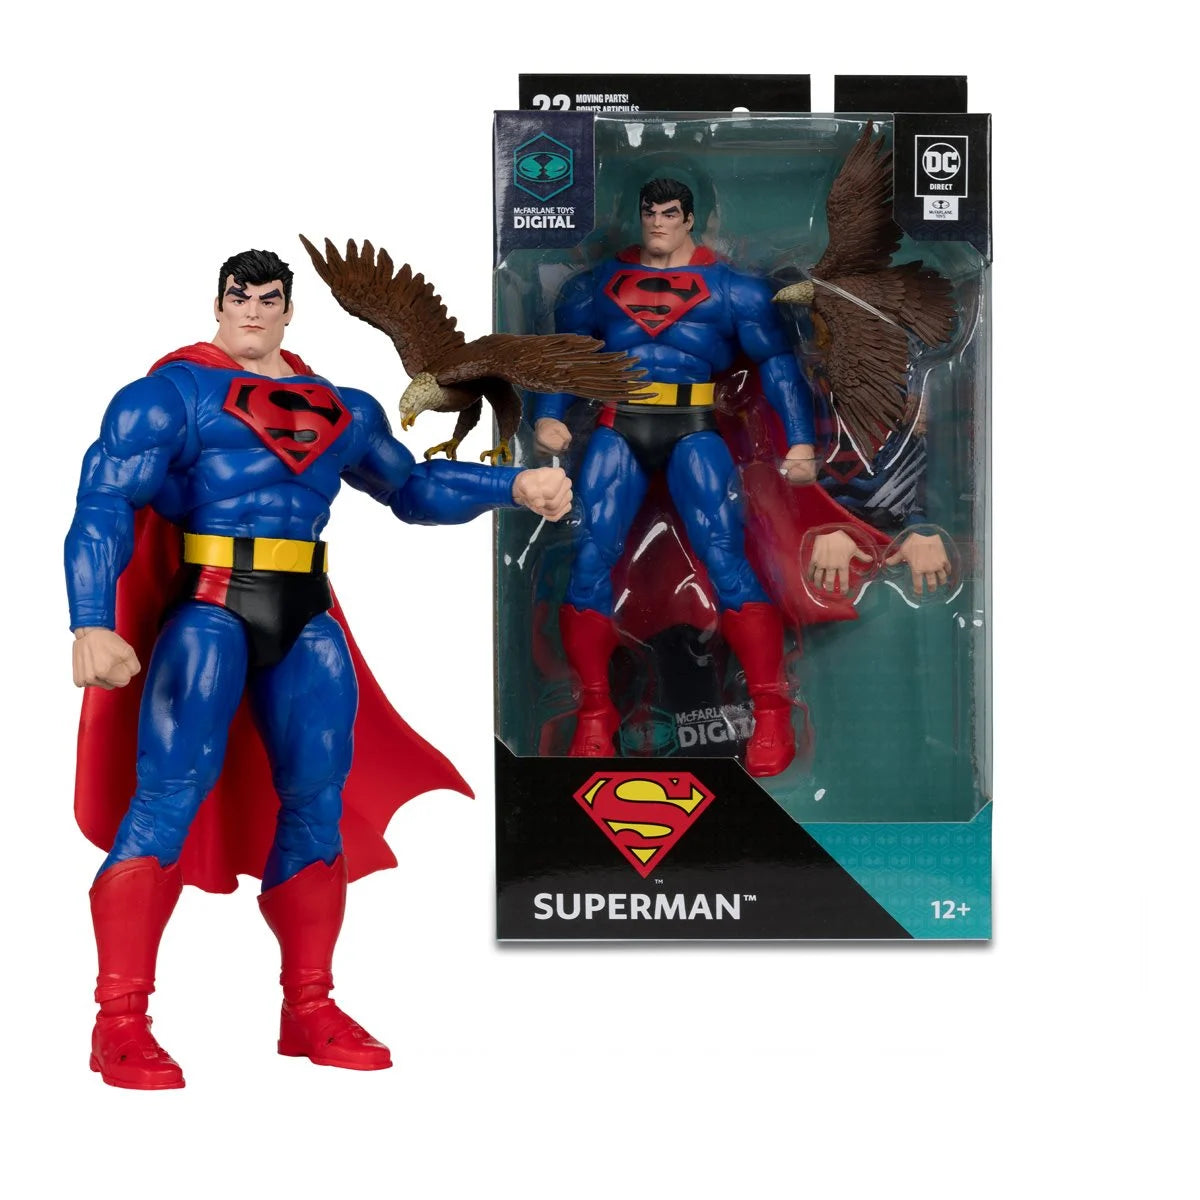 (PREVENTA) DC Direct Superman Our Worlds at War 7-Inch Scale Wave 2 Action Figure with McFarlane Toys Digital Collectible